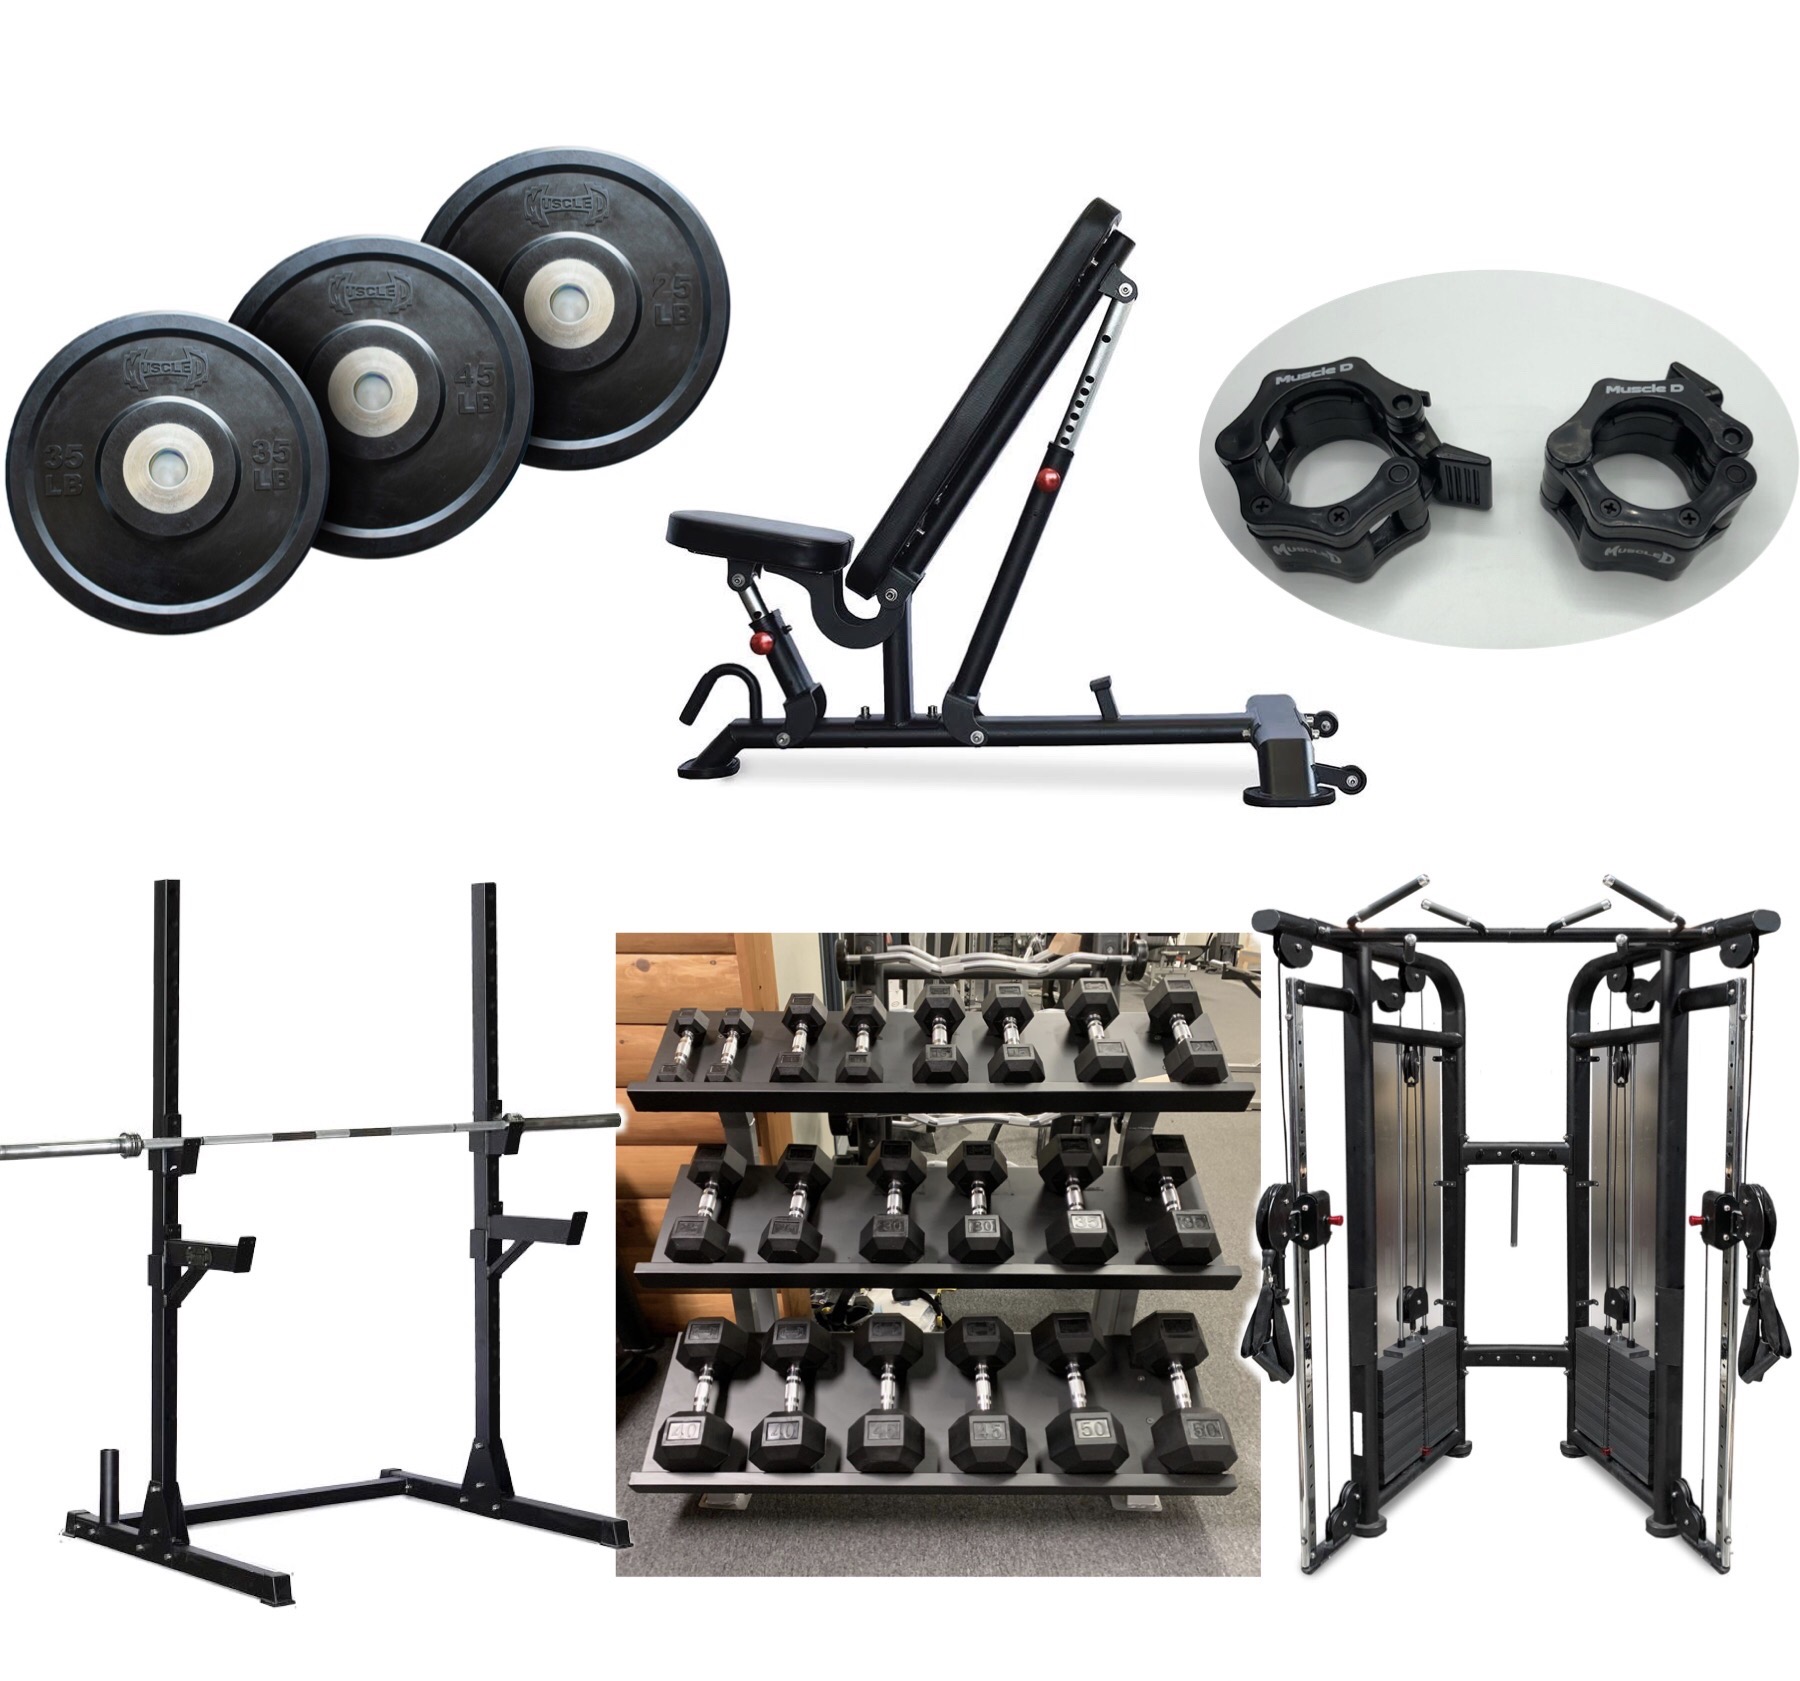 Muscle D- Home Gym Equipment Package